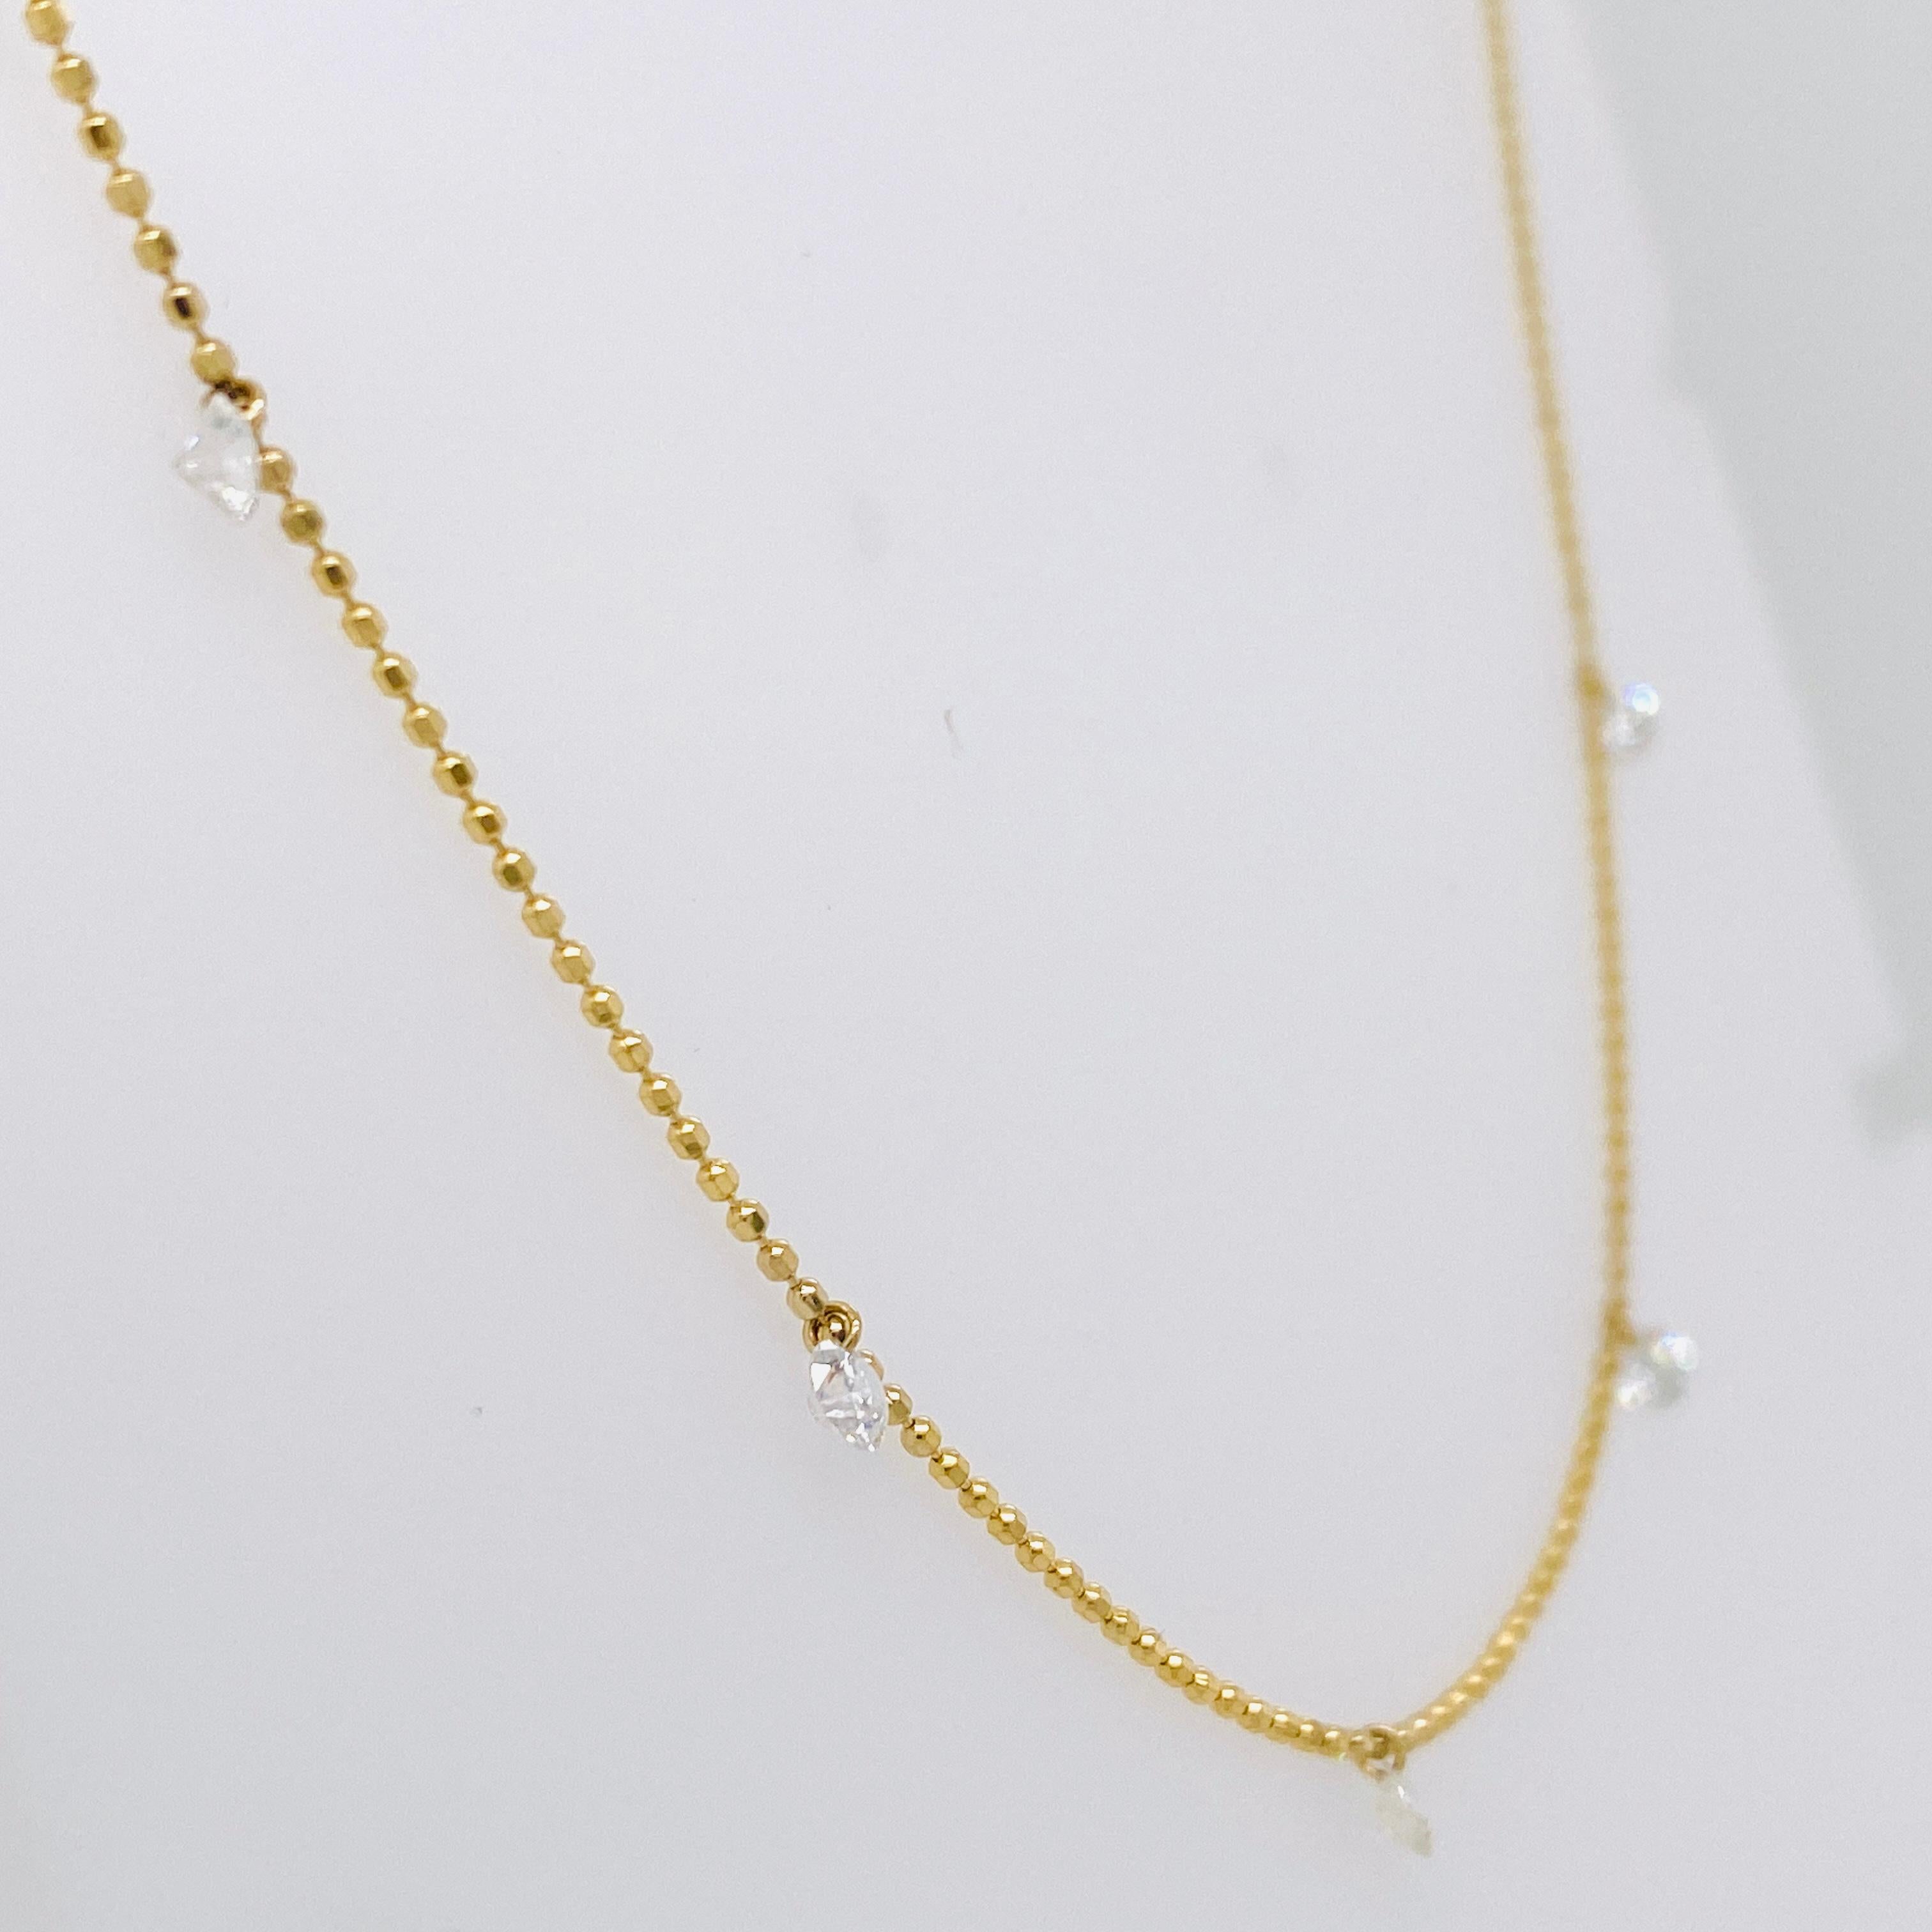 You will stun with the sleek elegance of this necklace! The dashing diamond look is a minimalist style with lots of sparkle as the five diamonds dangle freely to catch any light around! This great staple piece will suit any occasion whether you're